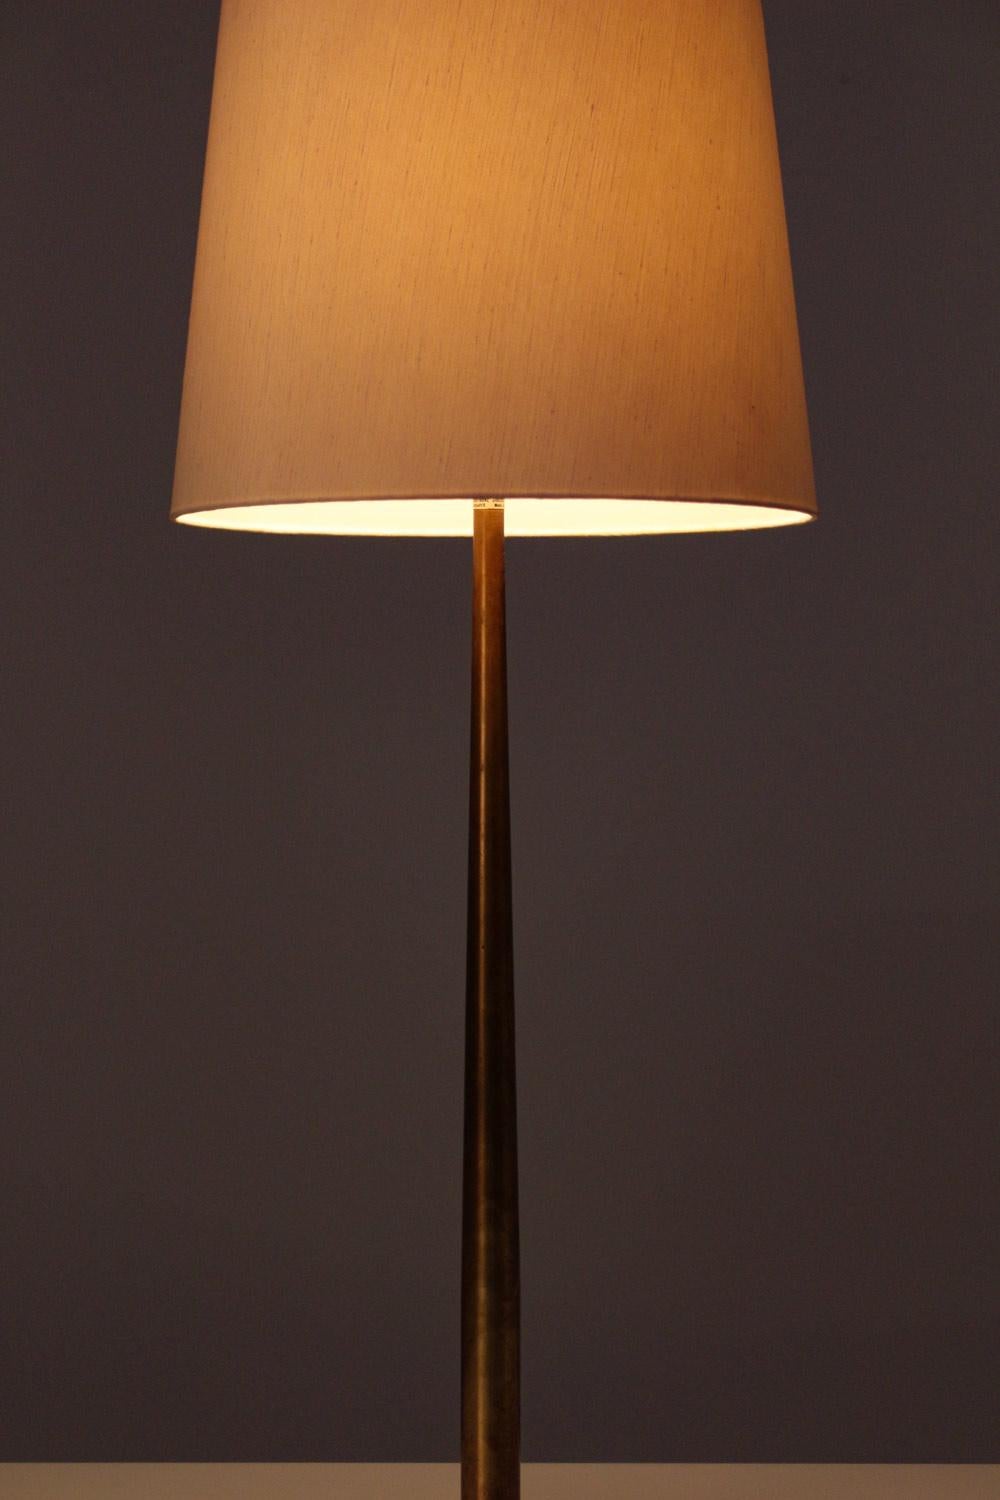 20th Century Early Midcentury Table Lamps B86 in Brass by Hans-Agne Jakobsson